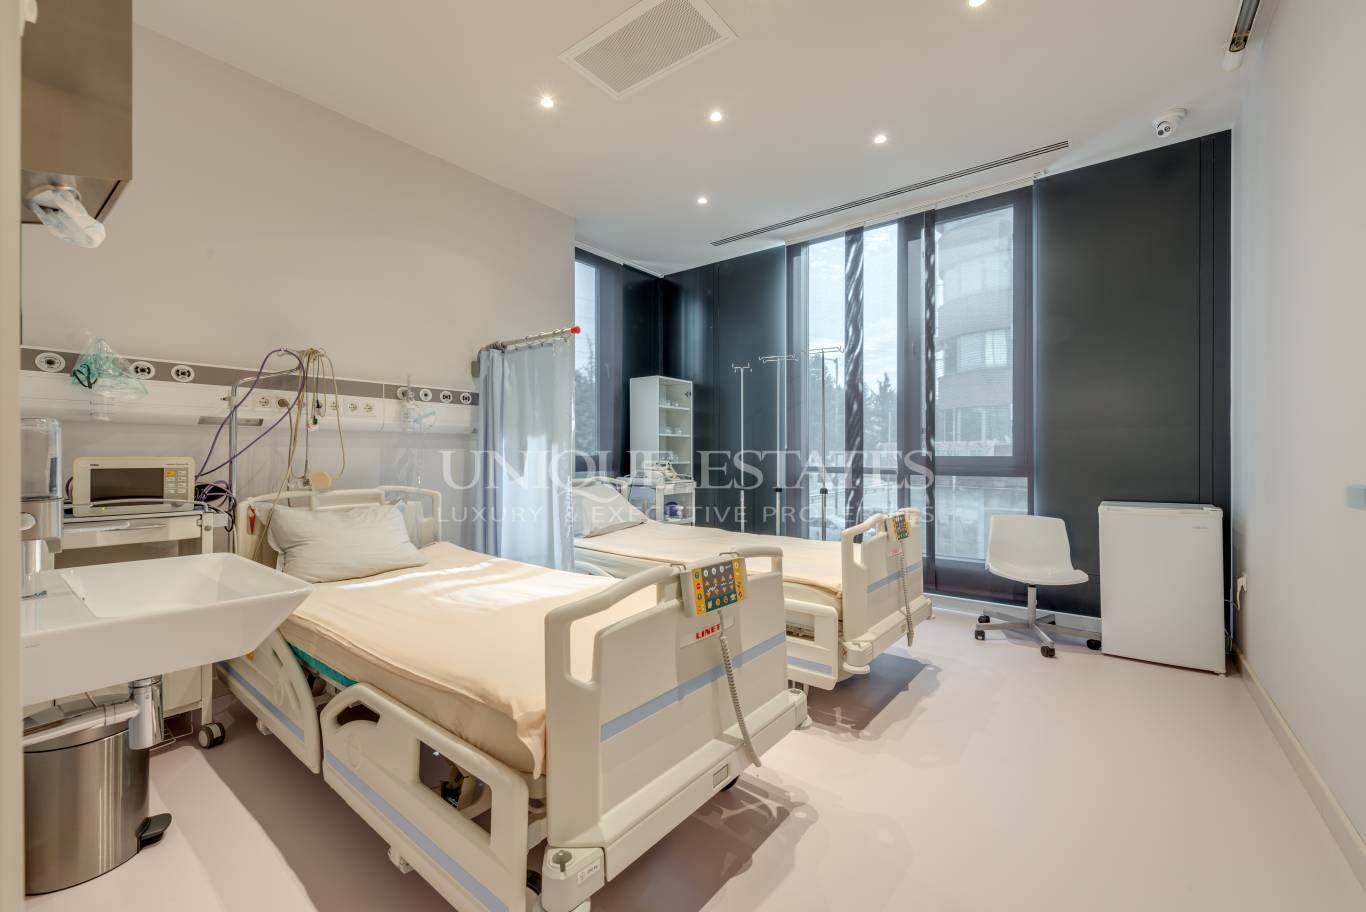 Clinic for sale in Sofia, Vitosha with listing ID: K14475 - image 9